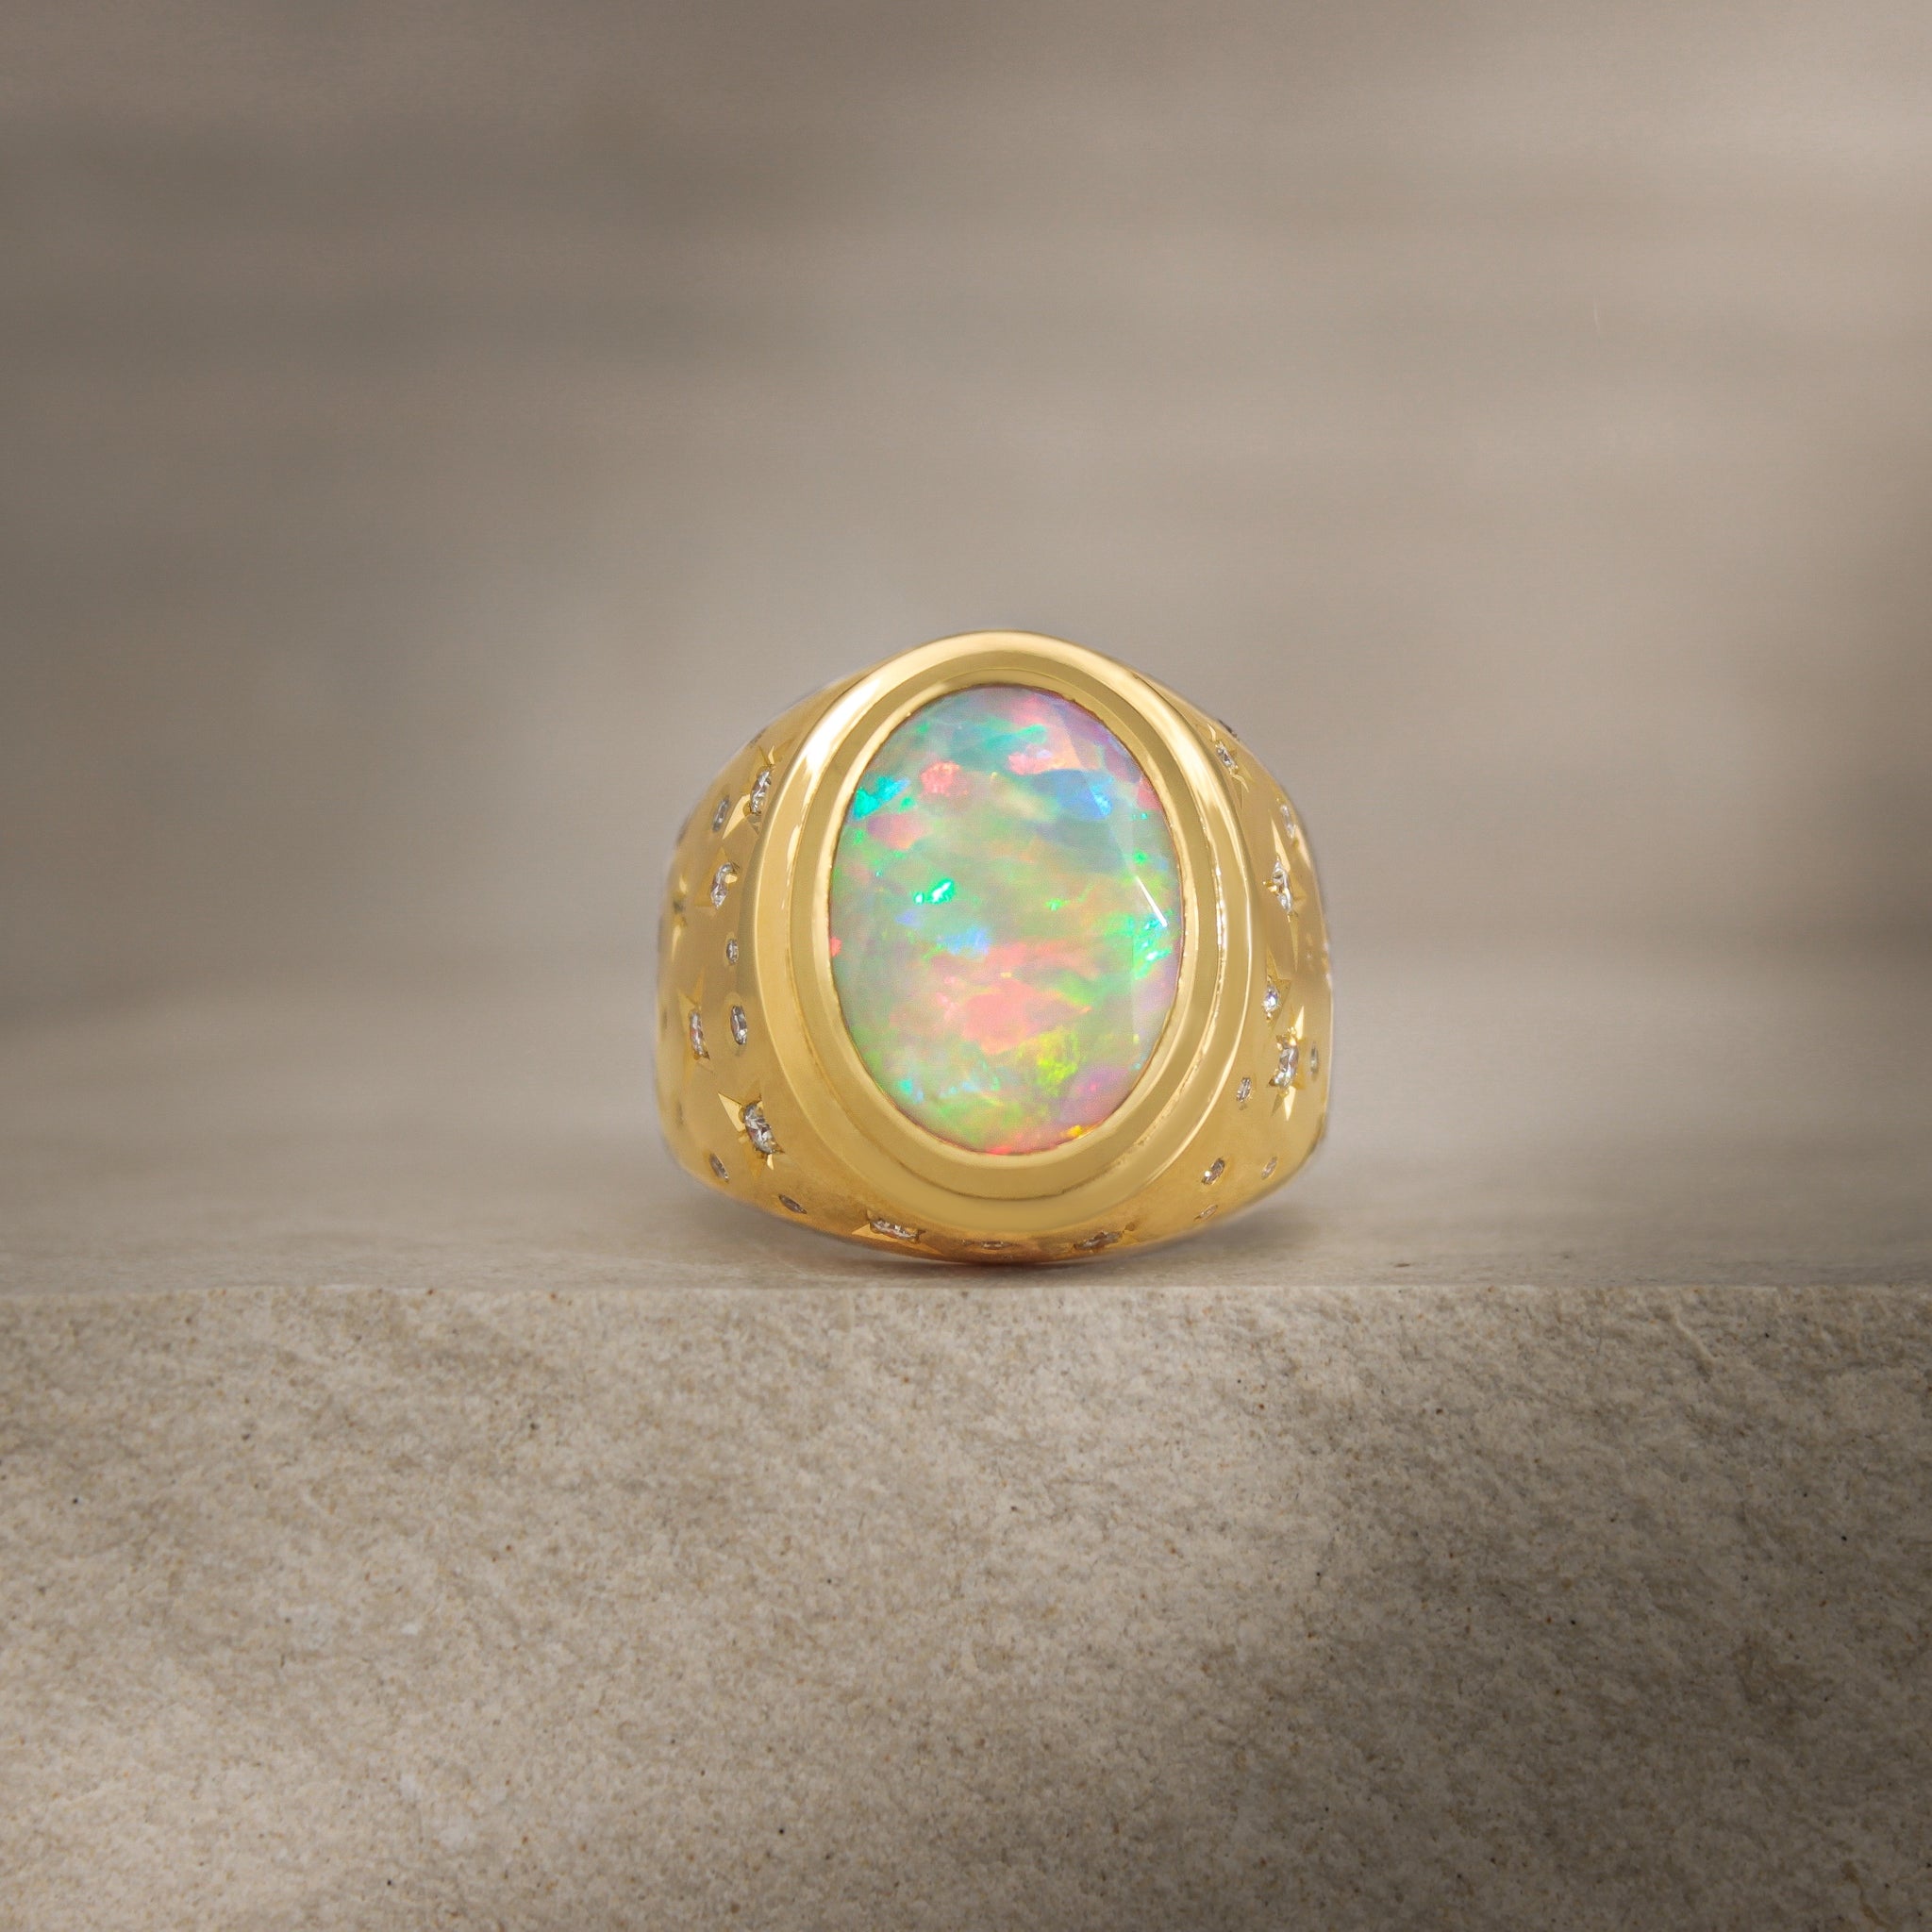 front view of Galaxy III signet ring showcasing the stunning 4ct opal stone with a rainbow of bright colors.